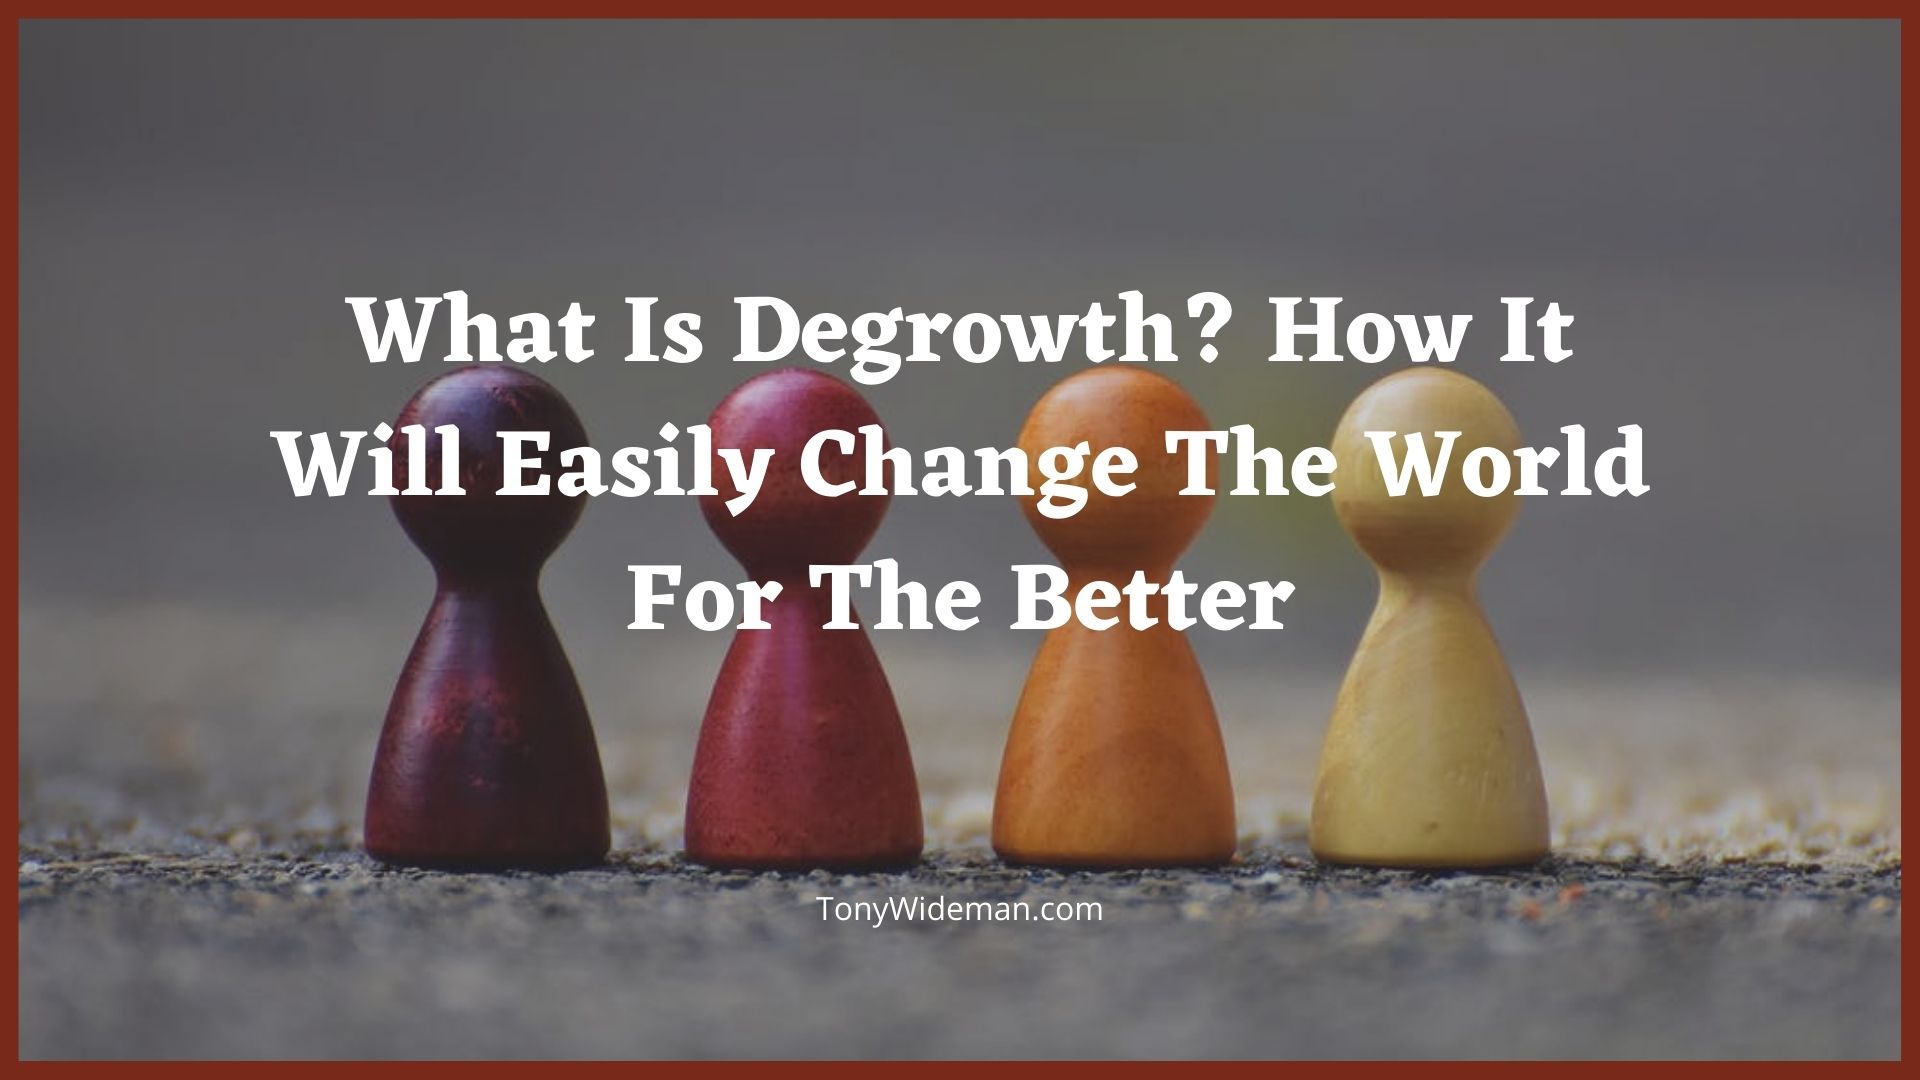 What Is Degrowth? How It Will Easily Change The World For The Better